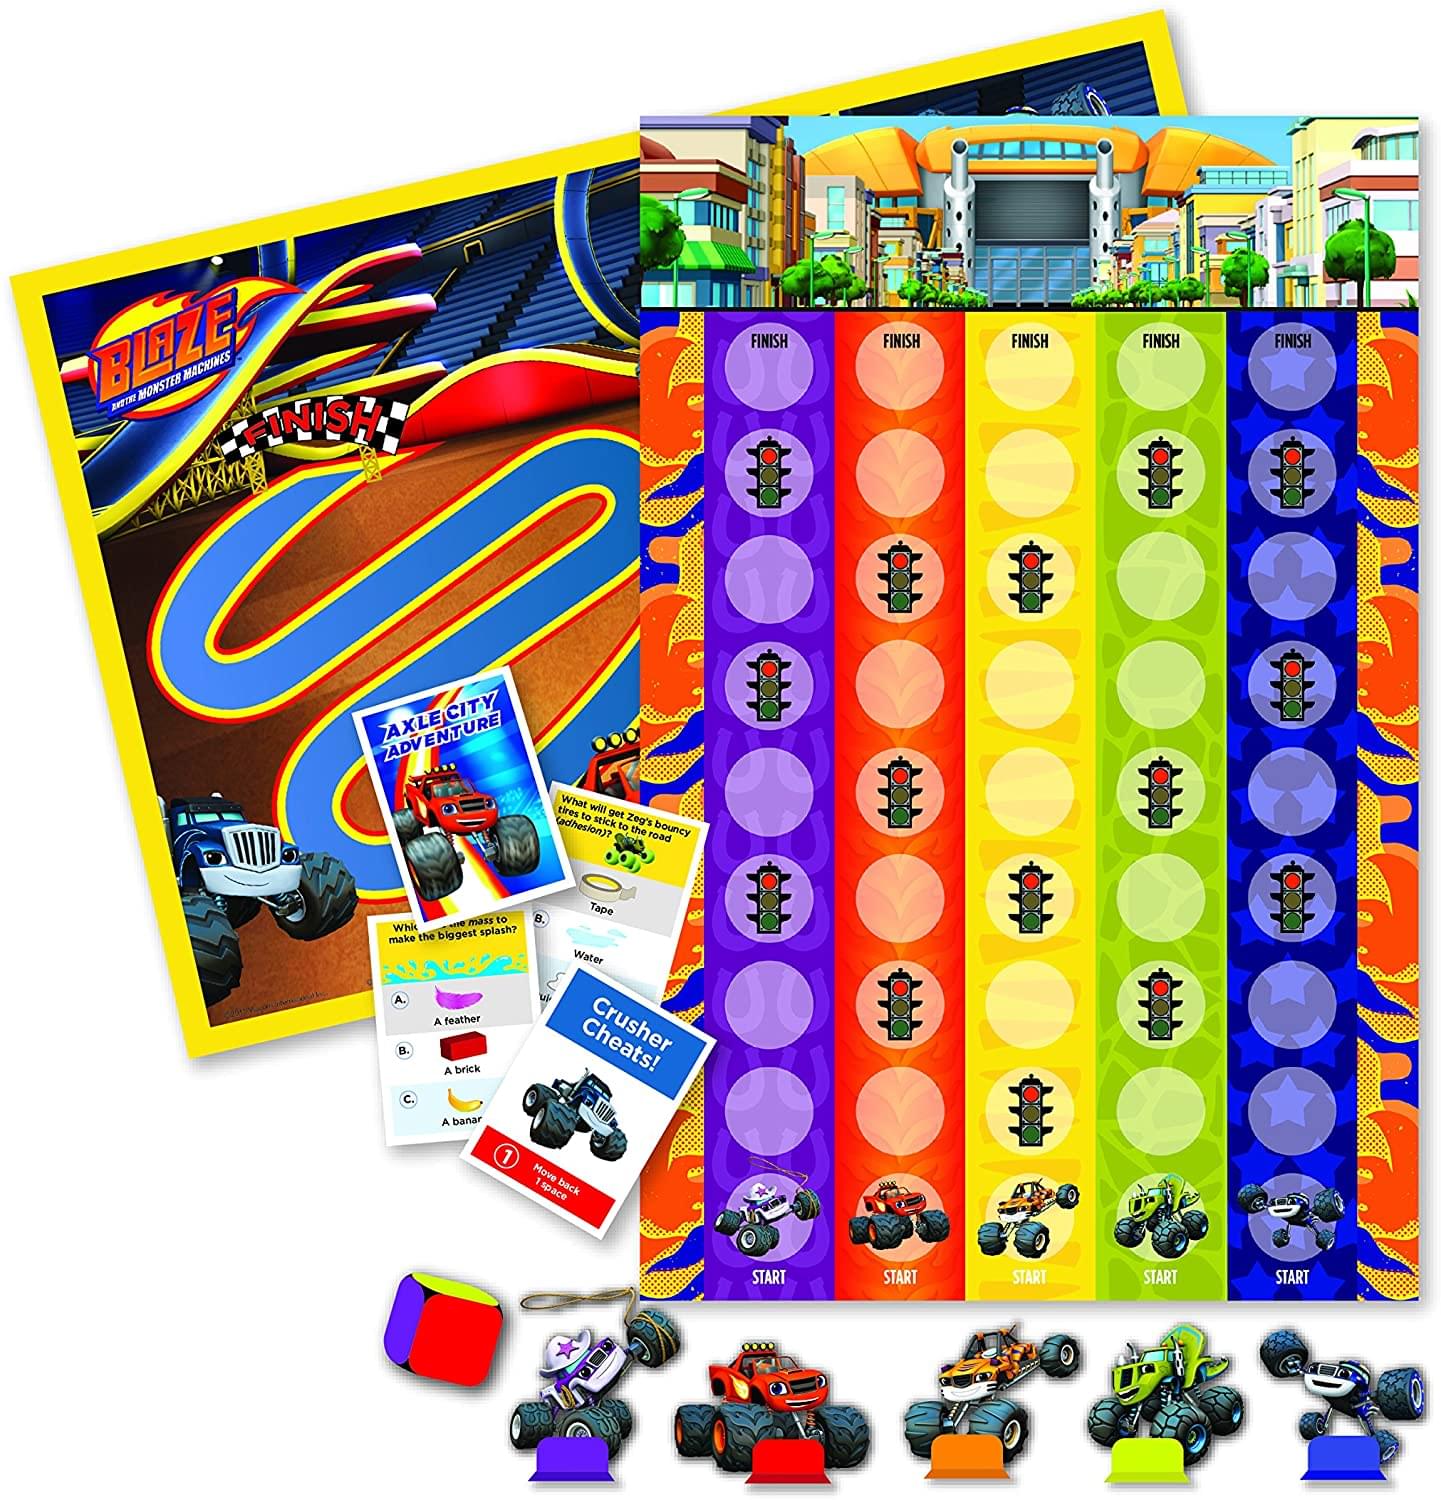 Nickelodeon Blaze and the Monster Machines Axle City Adventure Game